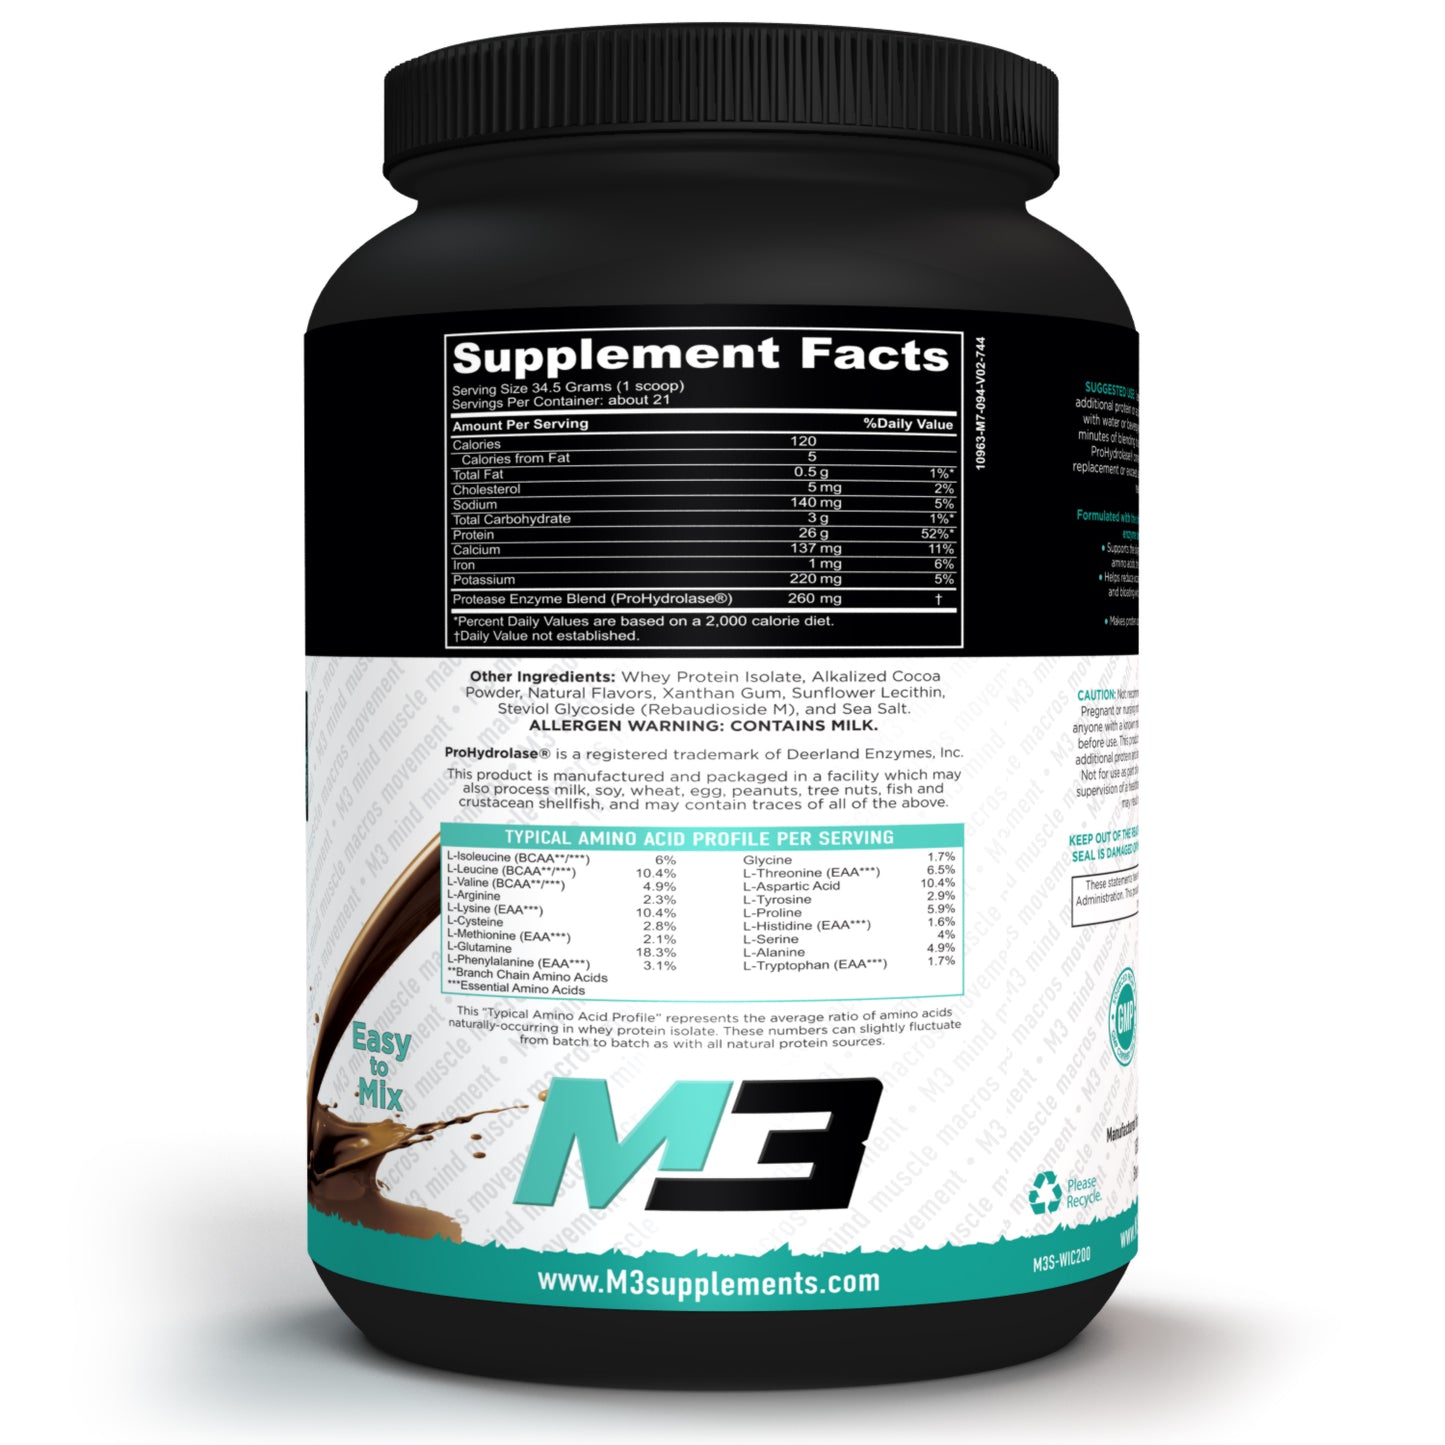 M3 Supplement Company brings you Whey Protein Isolate. With 26 grams of protein per serving, a Non-GMO formula, and 3 grams of carbs per serving. The protein is Low fat and low sodium. This chocolate flavor is amazing.